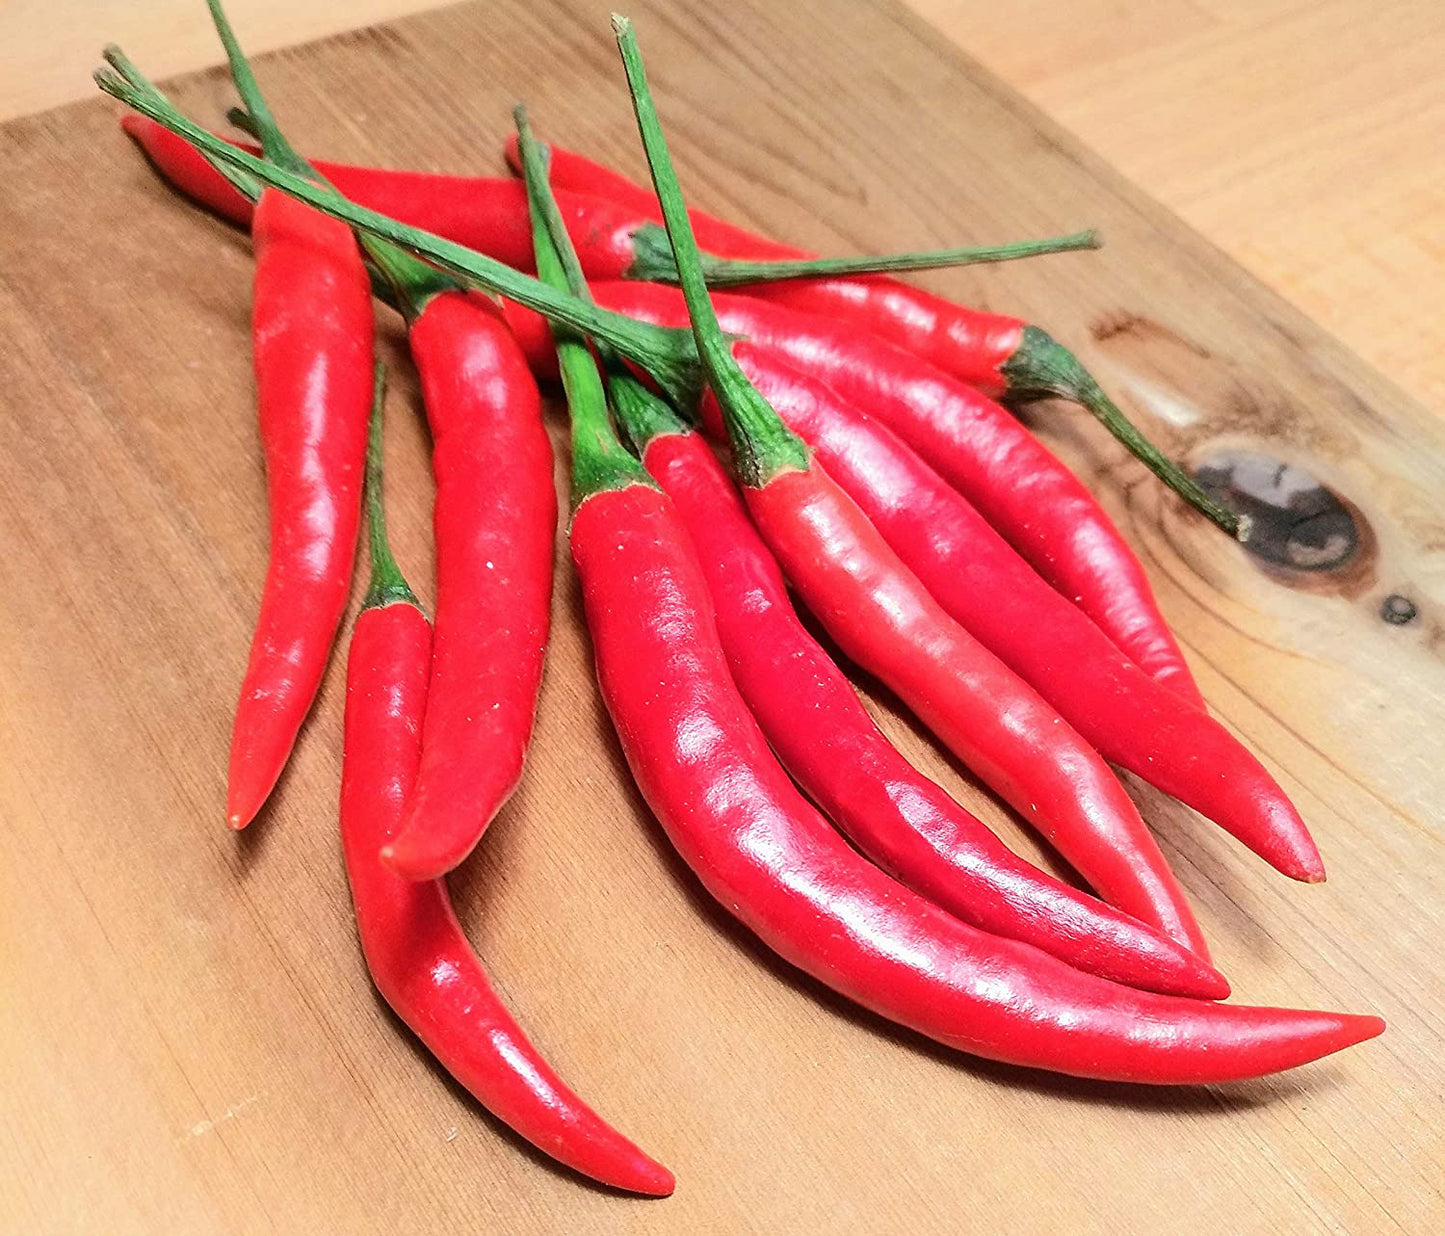 Hundredfold Organic Thai Hot Pepper Vegetable 20 Seeds - Capsicum annuum Non-GMO Chilli Pepper, Ornamental & Edible, Containers or Patio Gardens